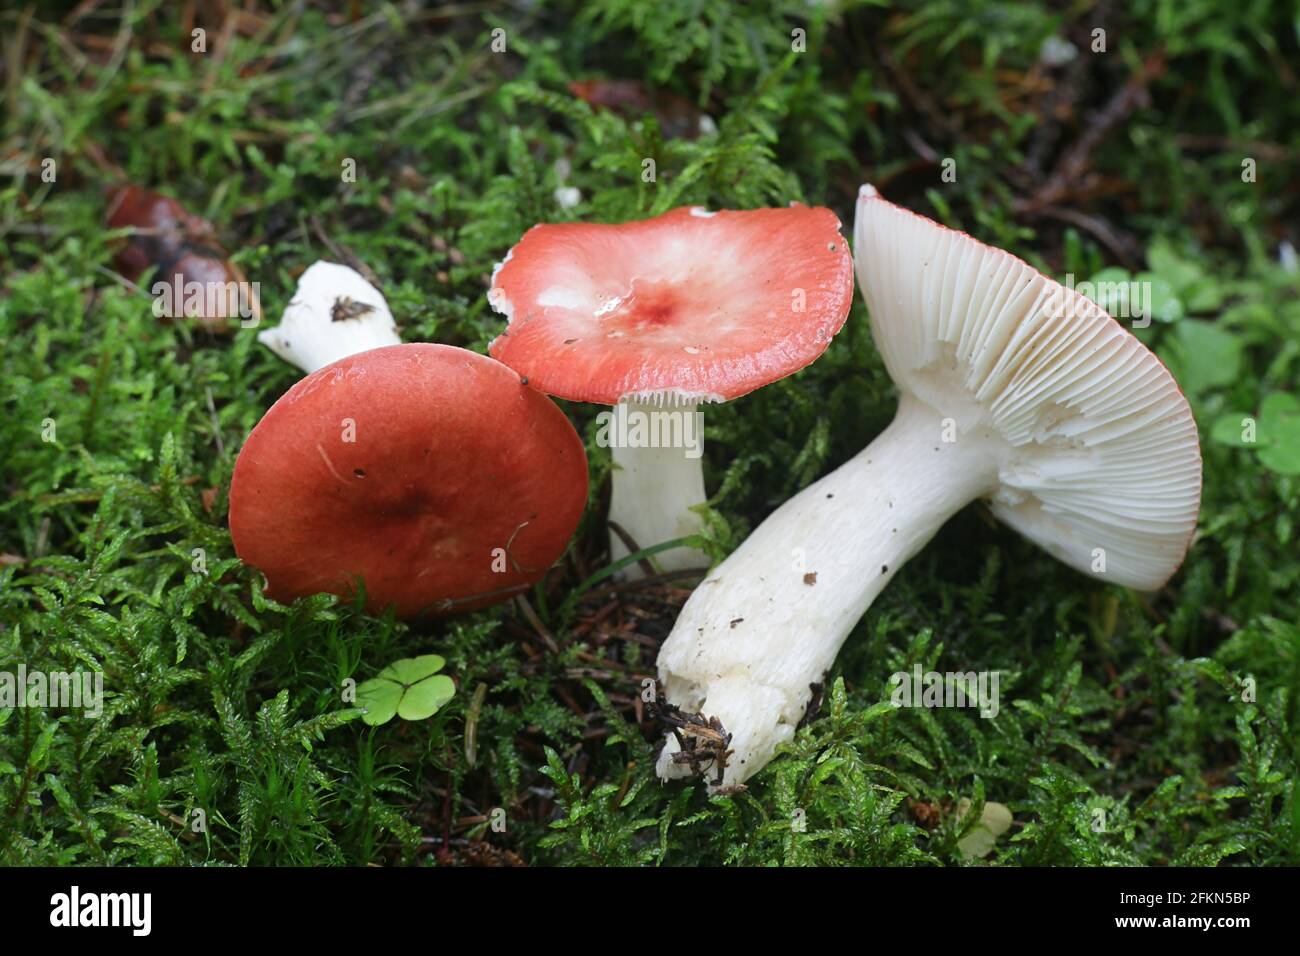 Russula emetica, commonly known as the sickener, emetic russula, or vomiting russula, wild mushroom from Finland Stock Photo